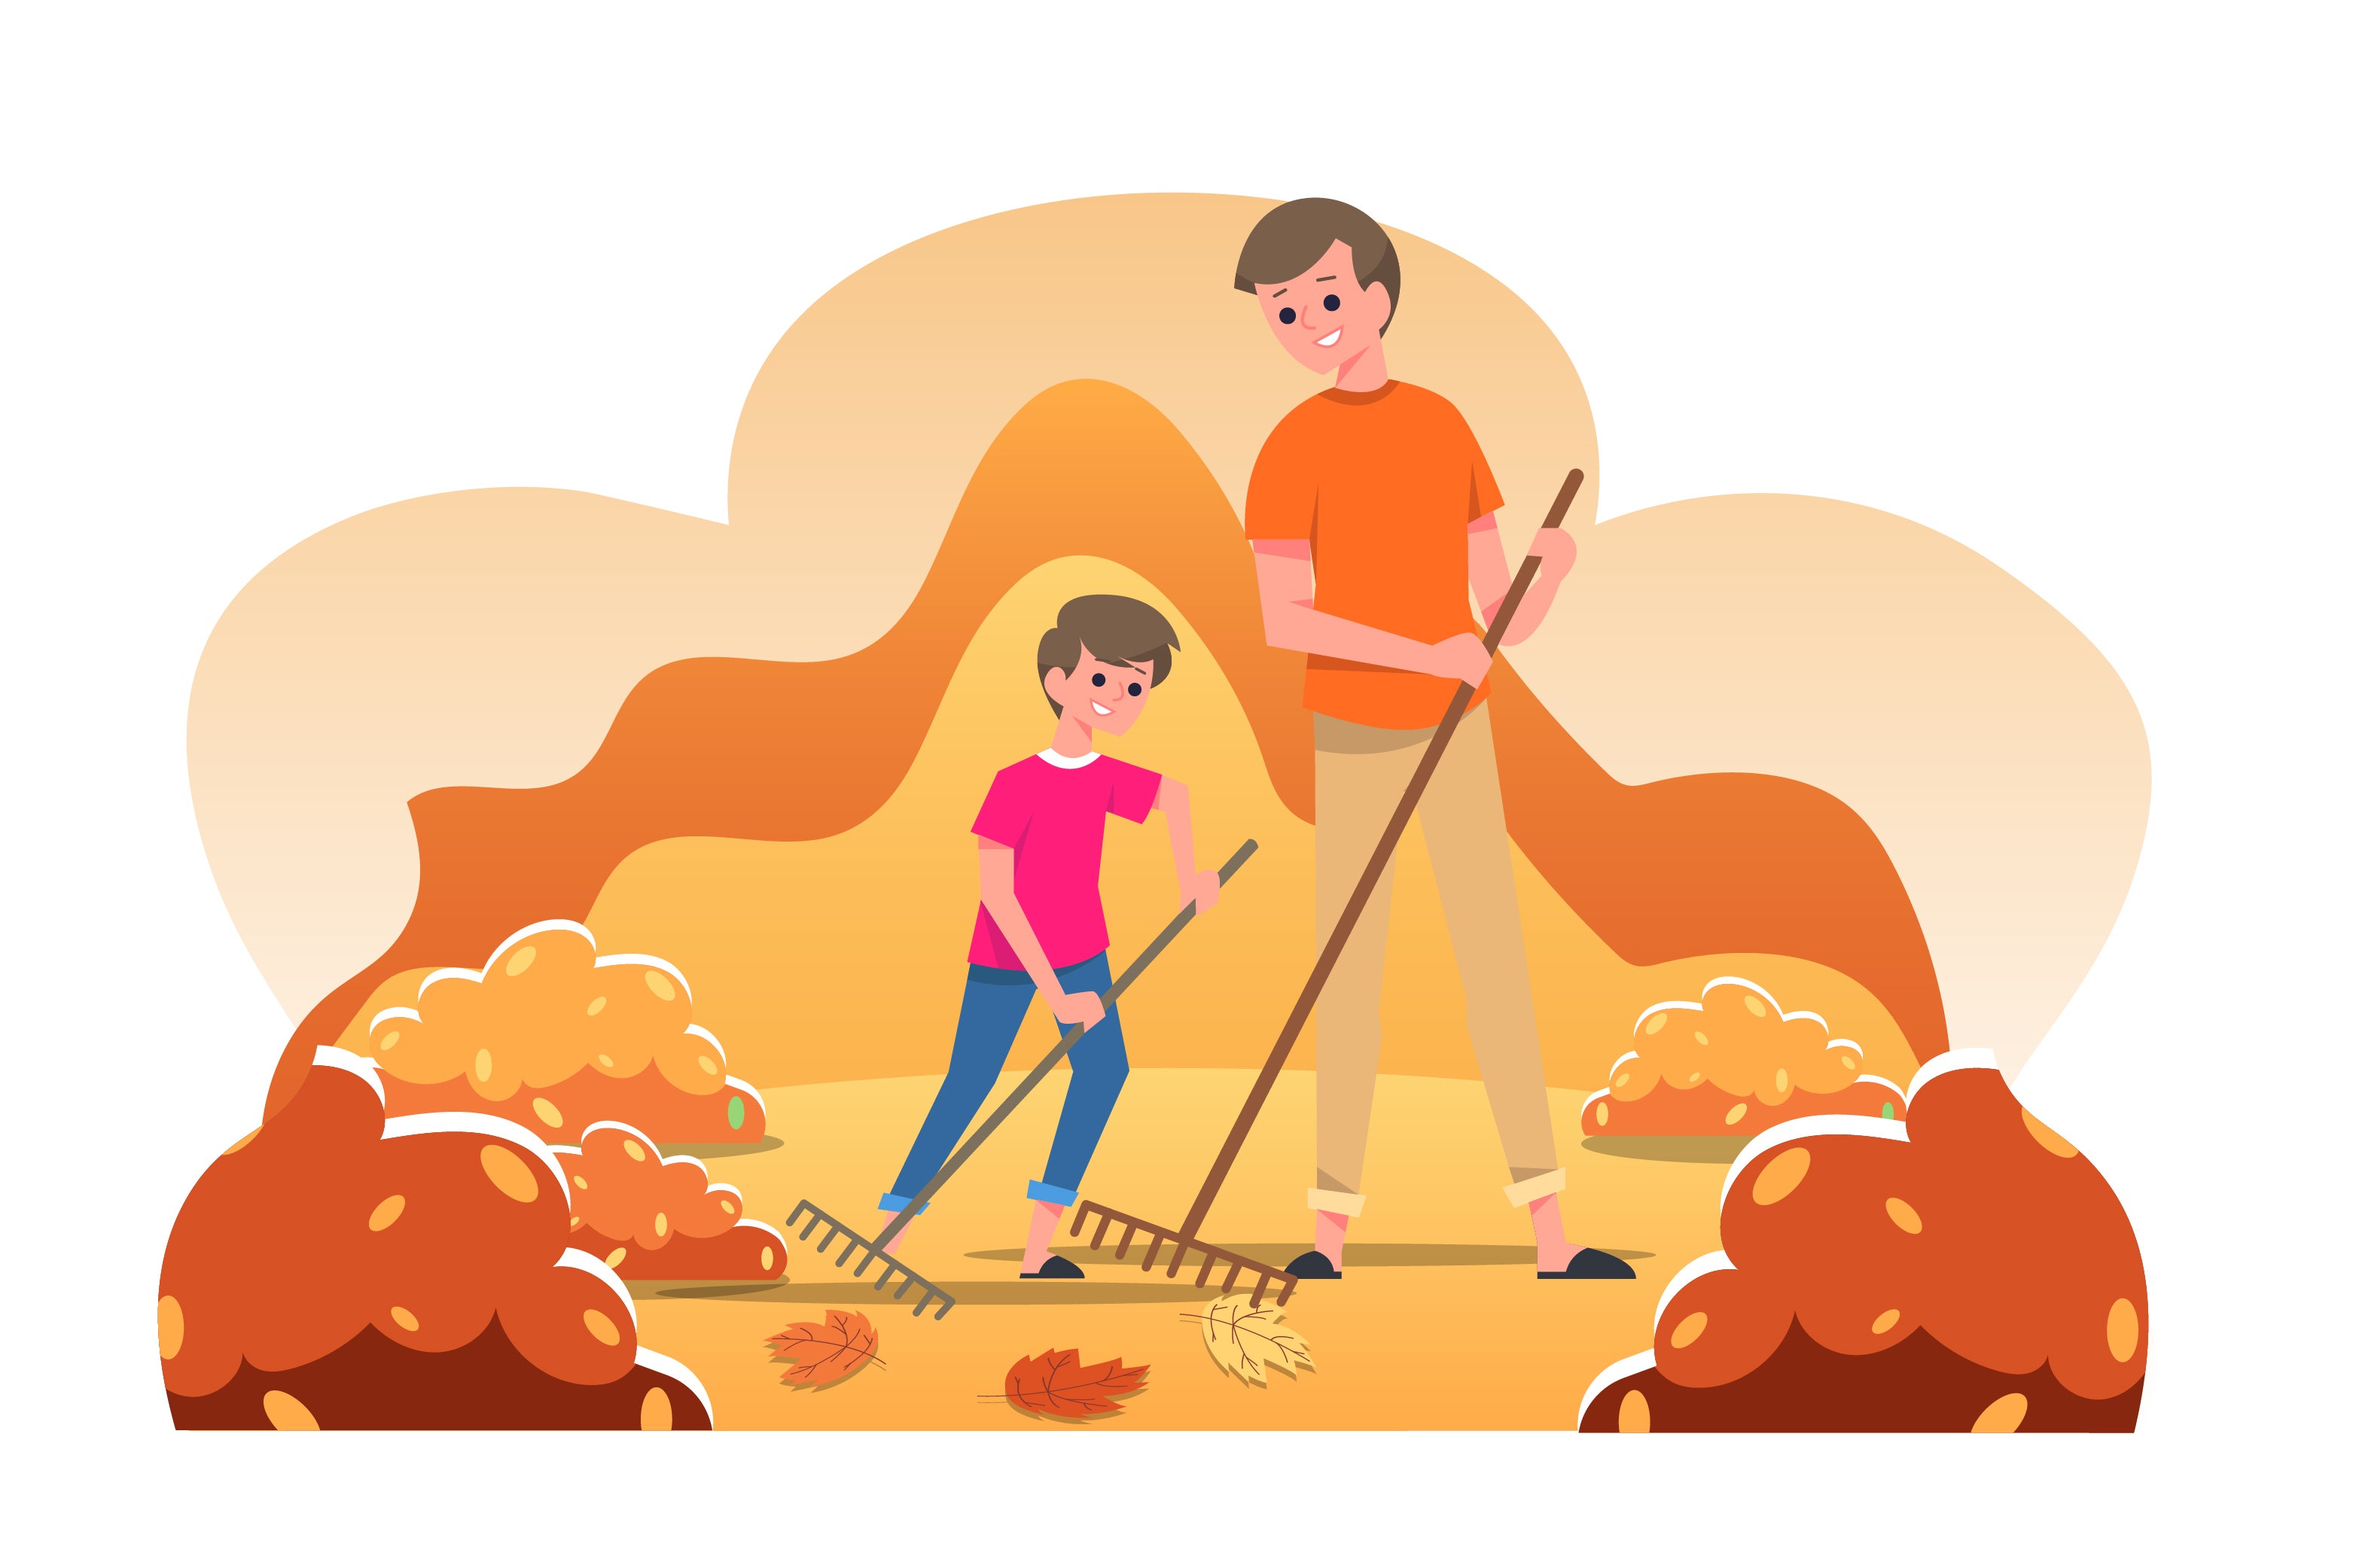 Graphic of father and child raking leaves together